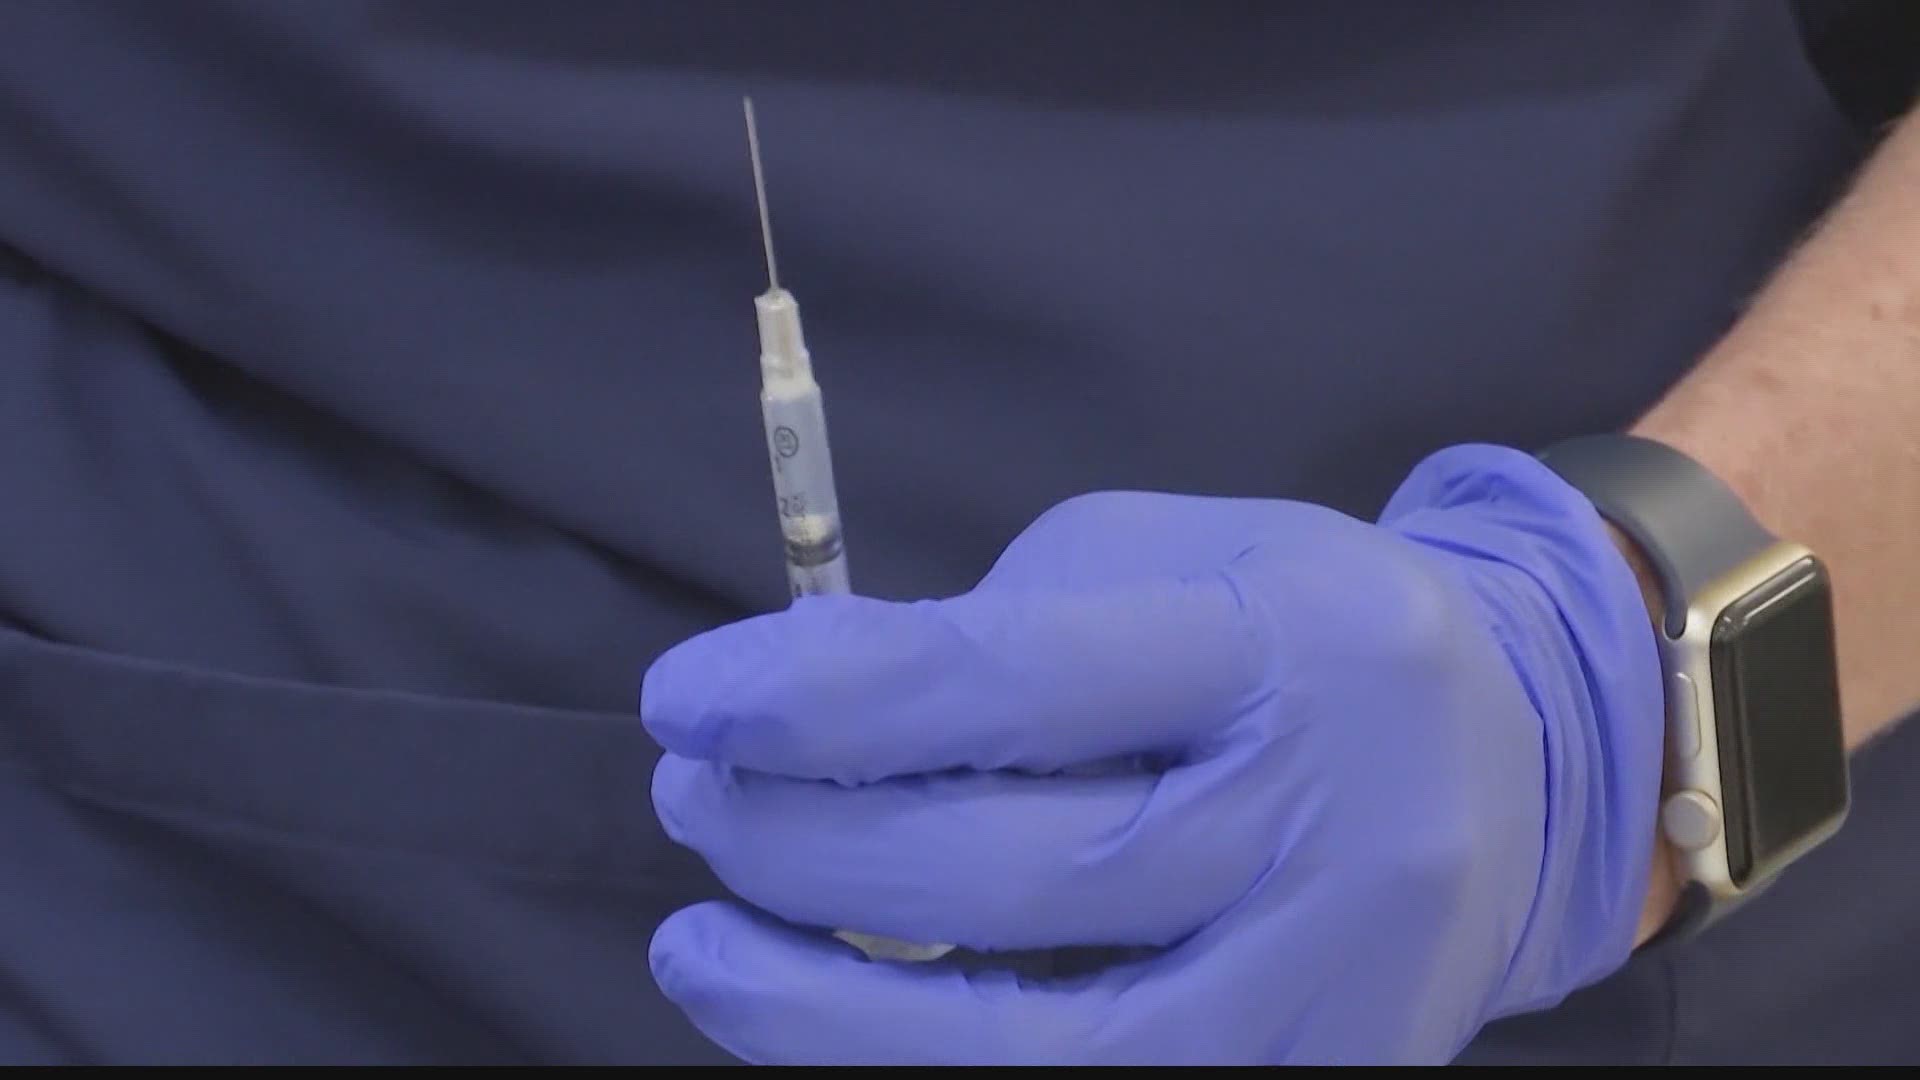 According to the Alabama Department of Public Health close to 400,000 people are fully vaccinated.